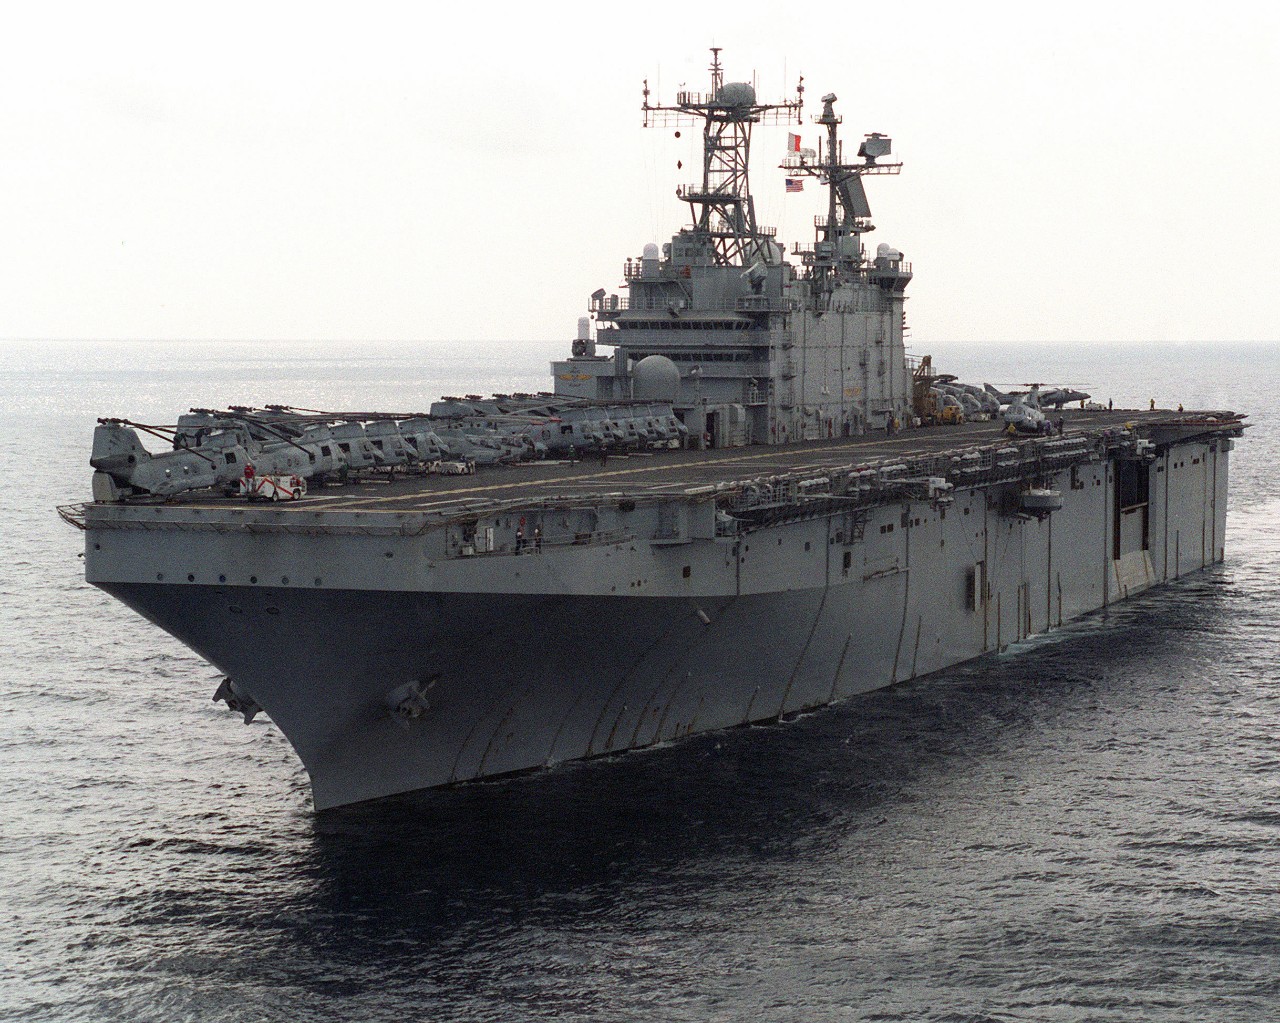 330-CFD-DN-SD-03-13090:    USS Tarawa (LHA-1), October 2000.   The amphibious assault ship is conducting flight operations off the coast of Aden, Yemen, during Operation Determined Response, October 28, 2000.   Photographed by PH1 David Miller, USN.    Official U.S. Navy Photograph, now in the collections of the National Archives.  